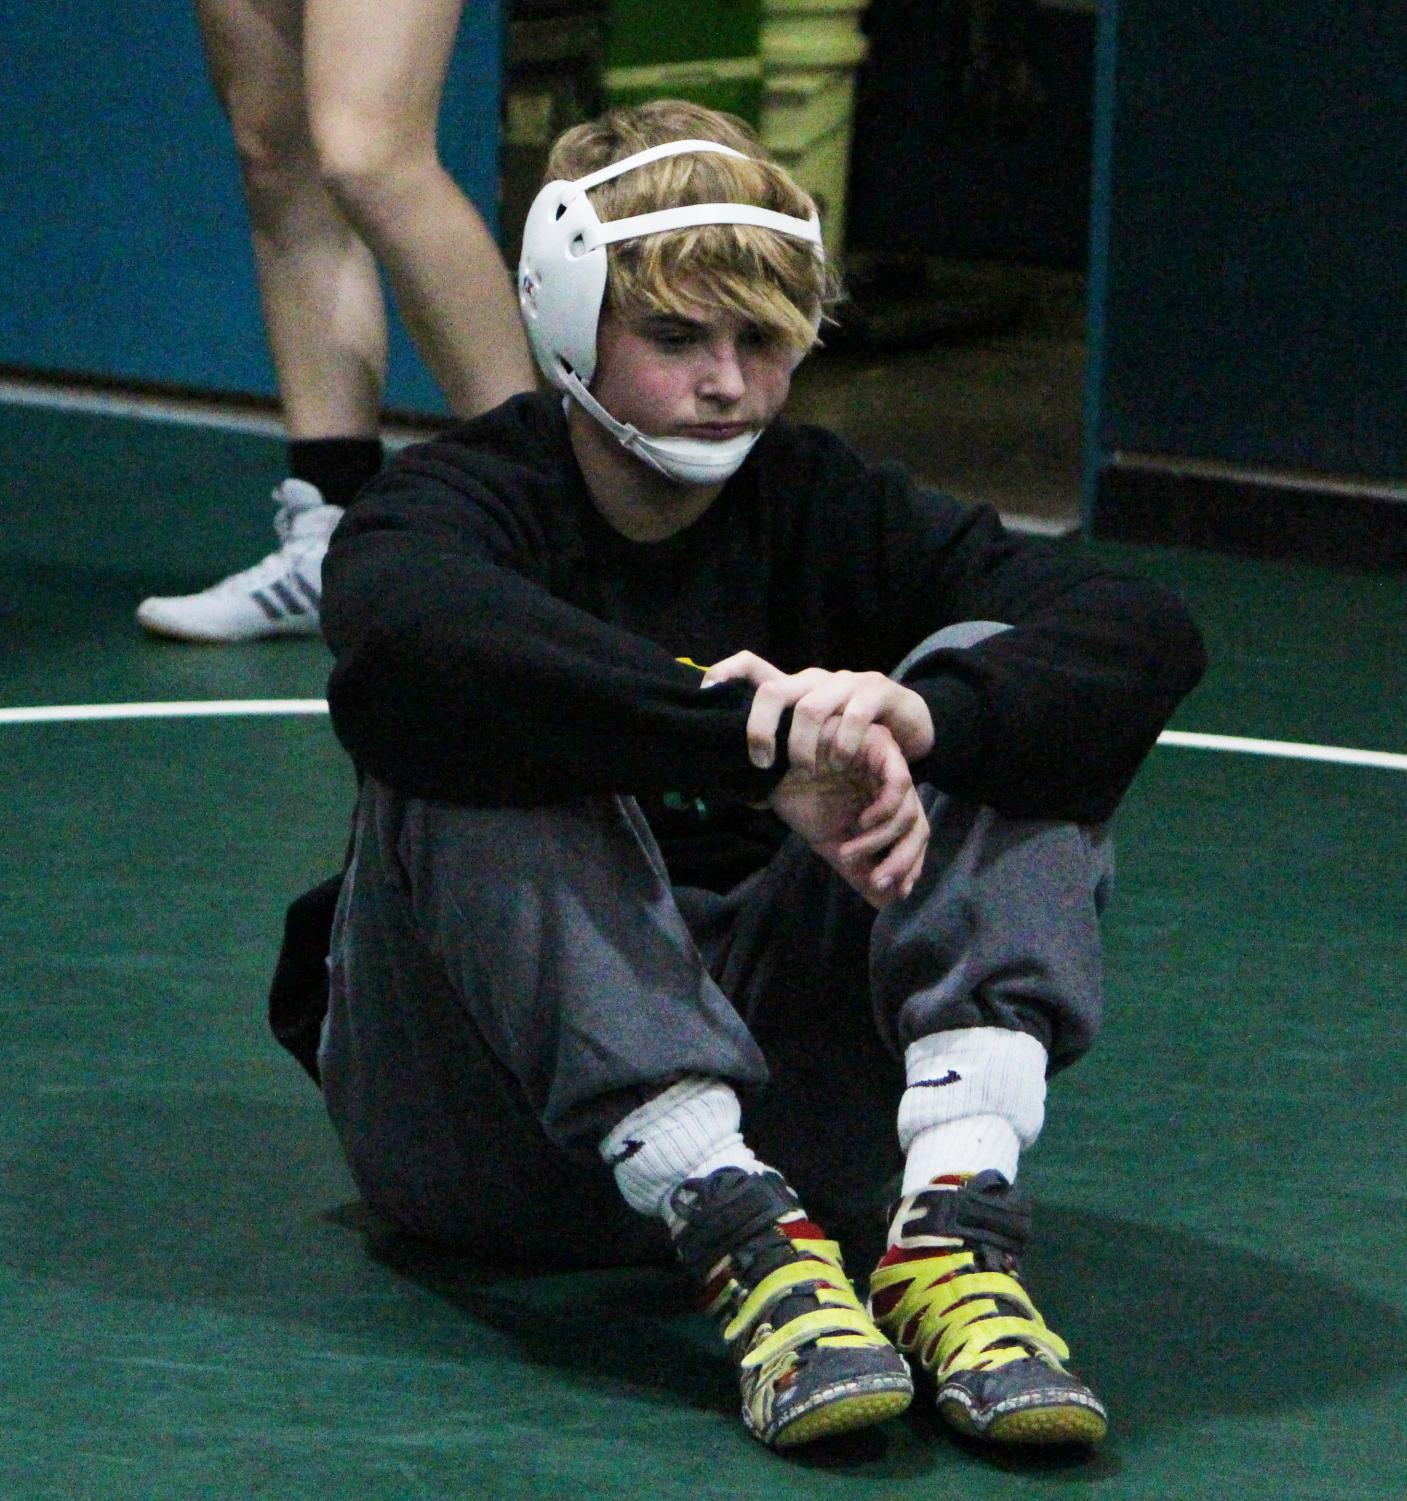 Wrestling+Practice+%28Photos+by+Talia+Ransom%29